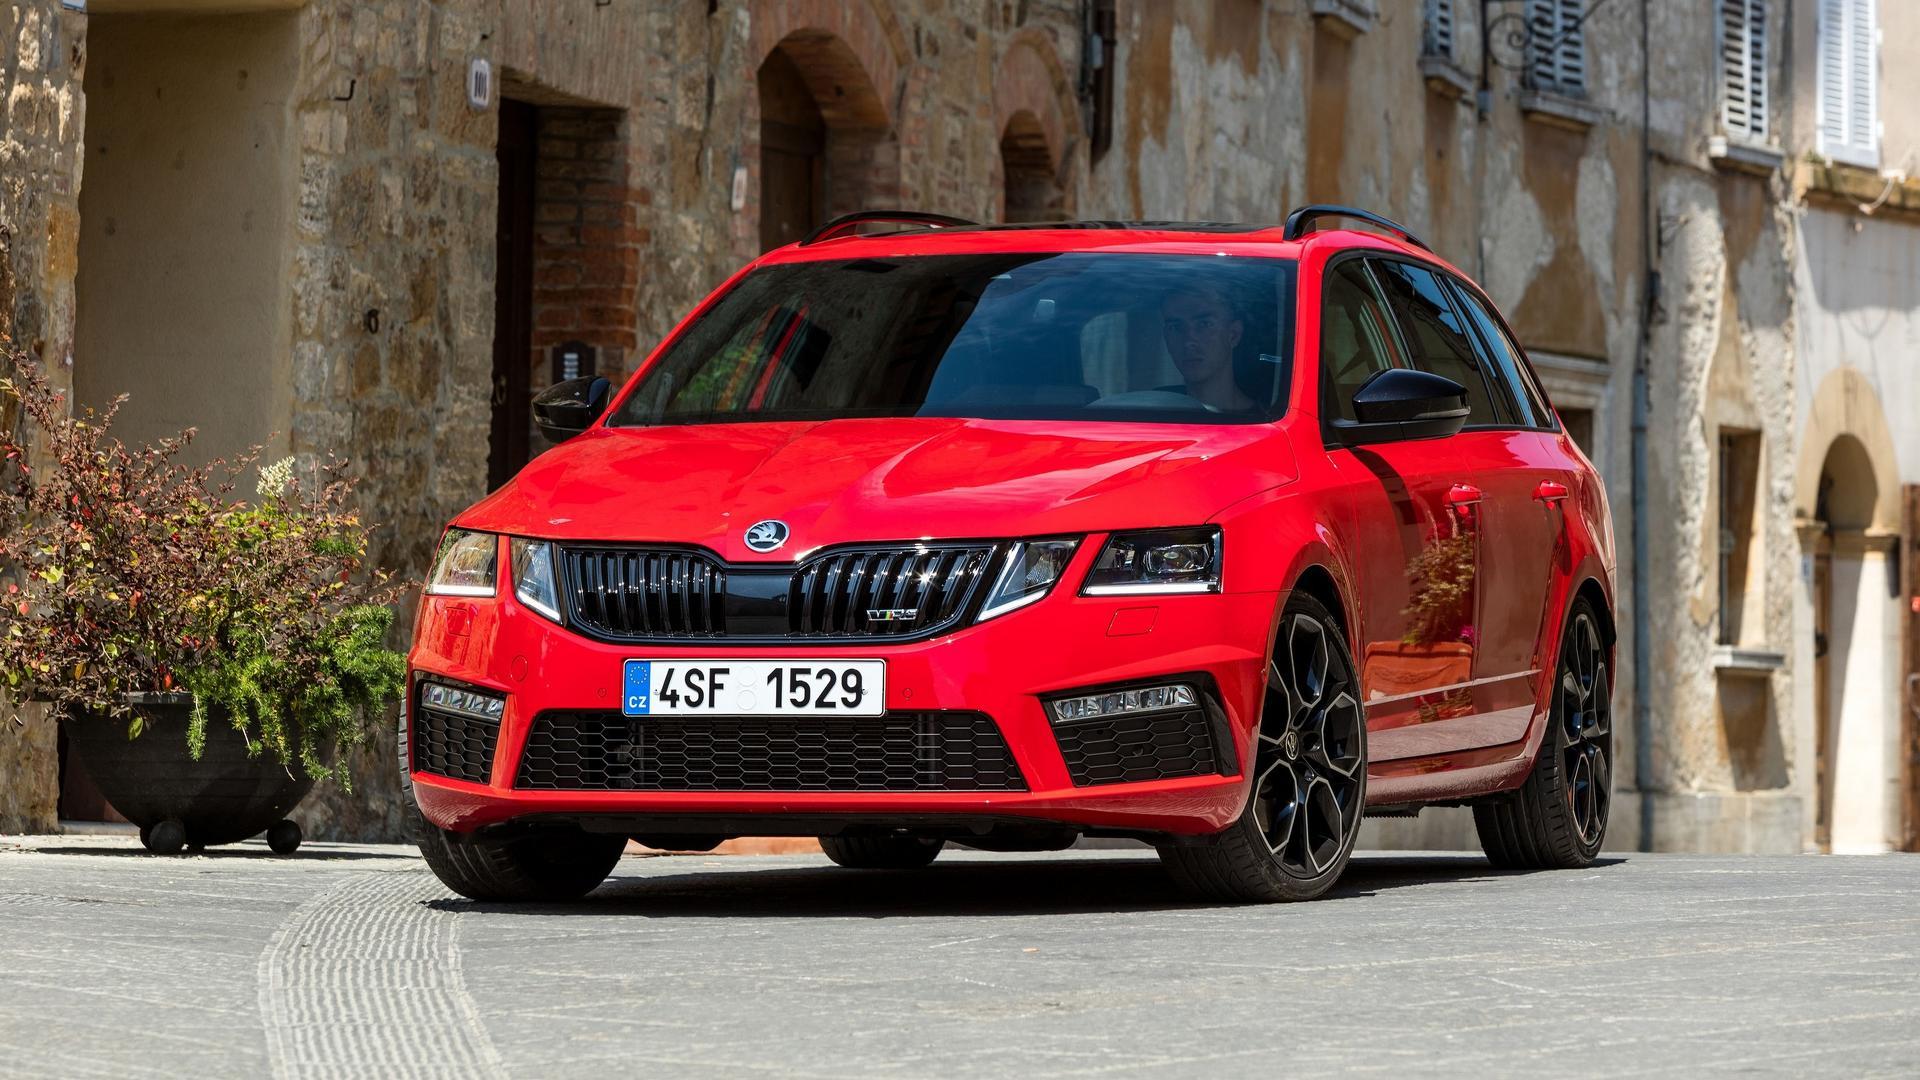 Skoda Octavia RS 245 Shows Its Sporty Side In New Image, Videos